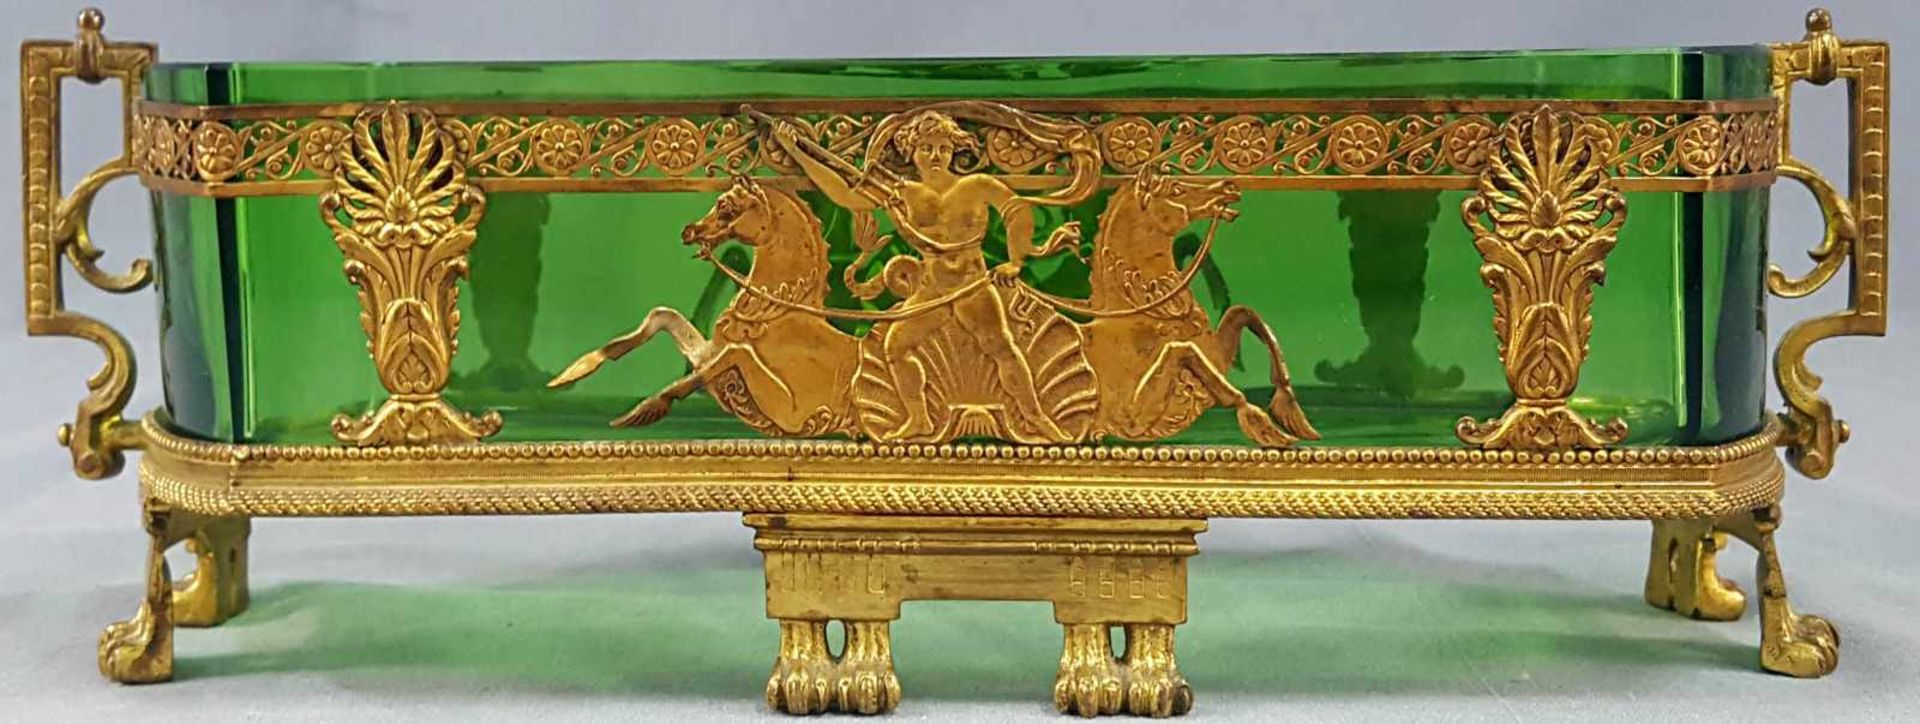 Jardinière, France, probably Empire Period. Fire gilded.< - Image 3 of 8